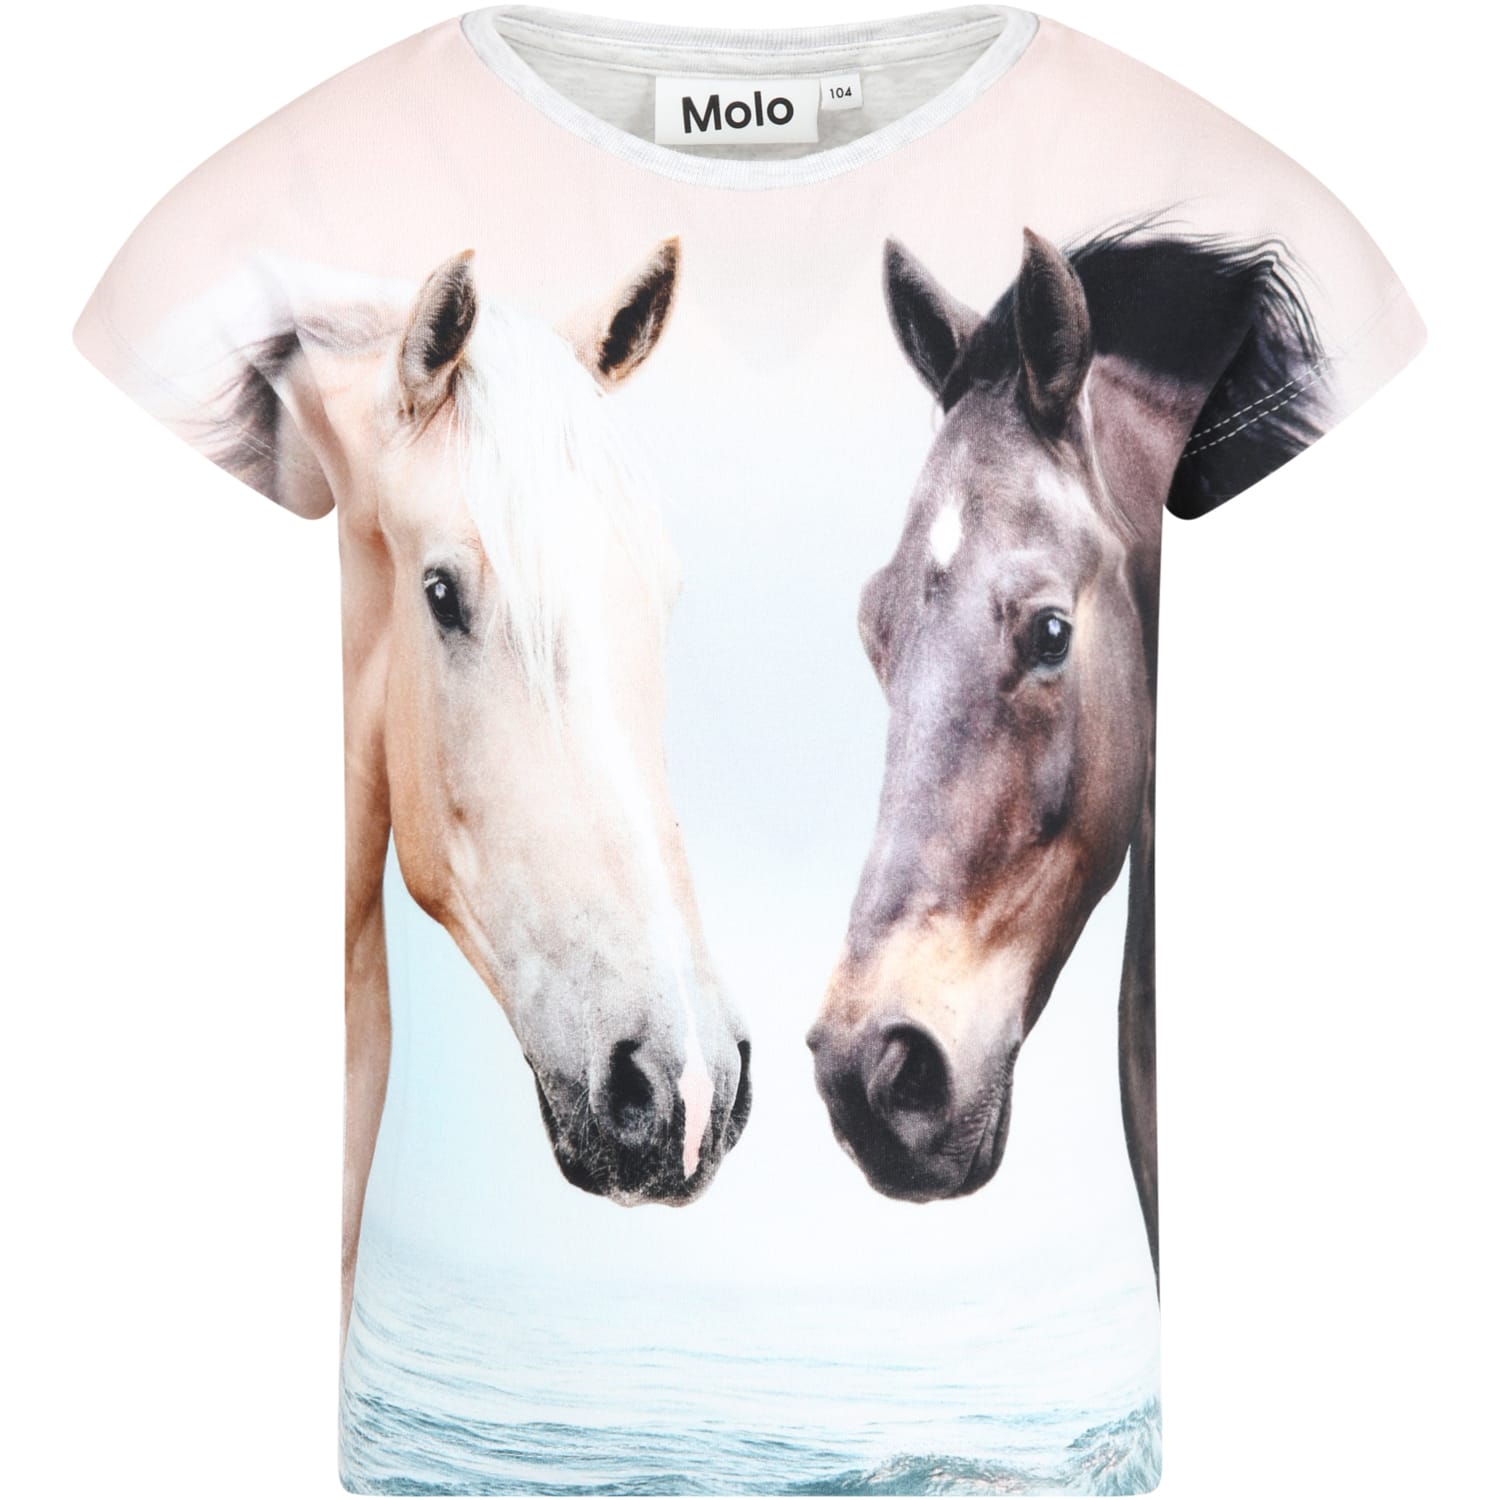 Molo Multicolor T-shirt For Girl With Horses